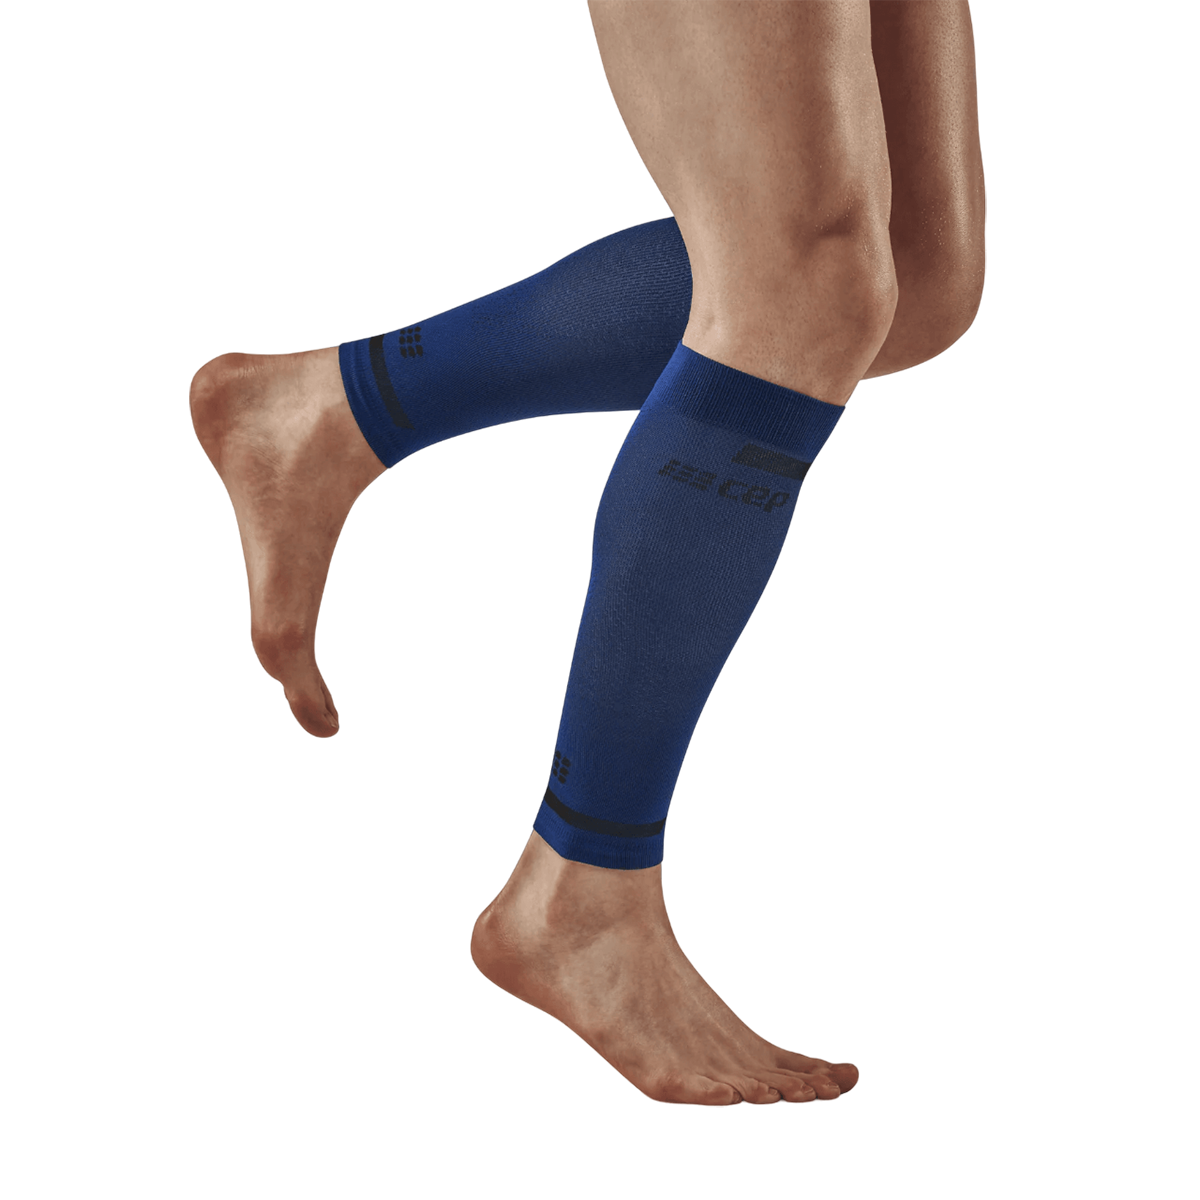 https://www.fit2run.com/on/demandware.static/-/Sites-fit2run-master-catalog/en_US/dw47942286/large/CEP/Calf%20Sleeves%204.0/Blue/WS303R4_blue_1.png